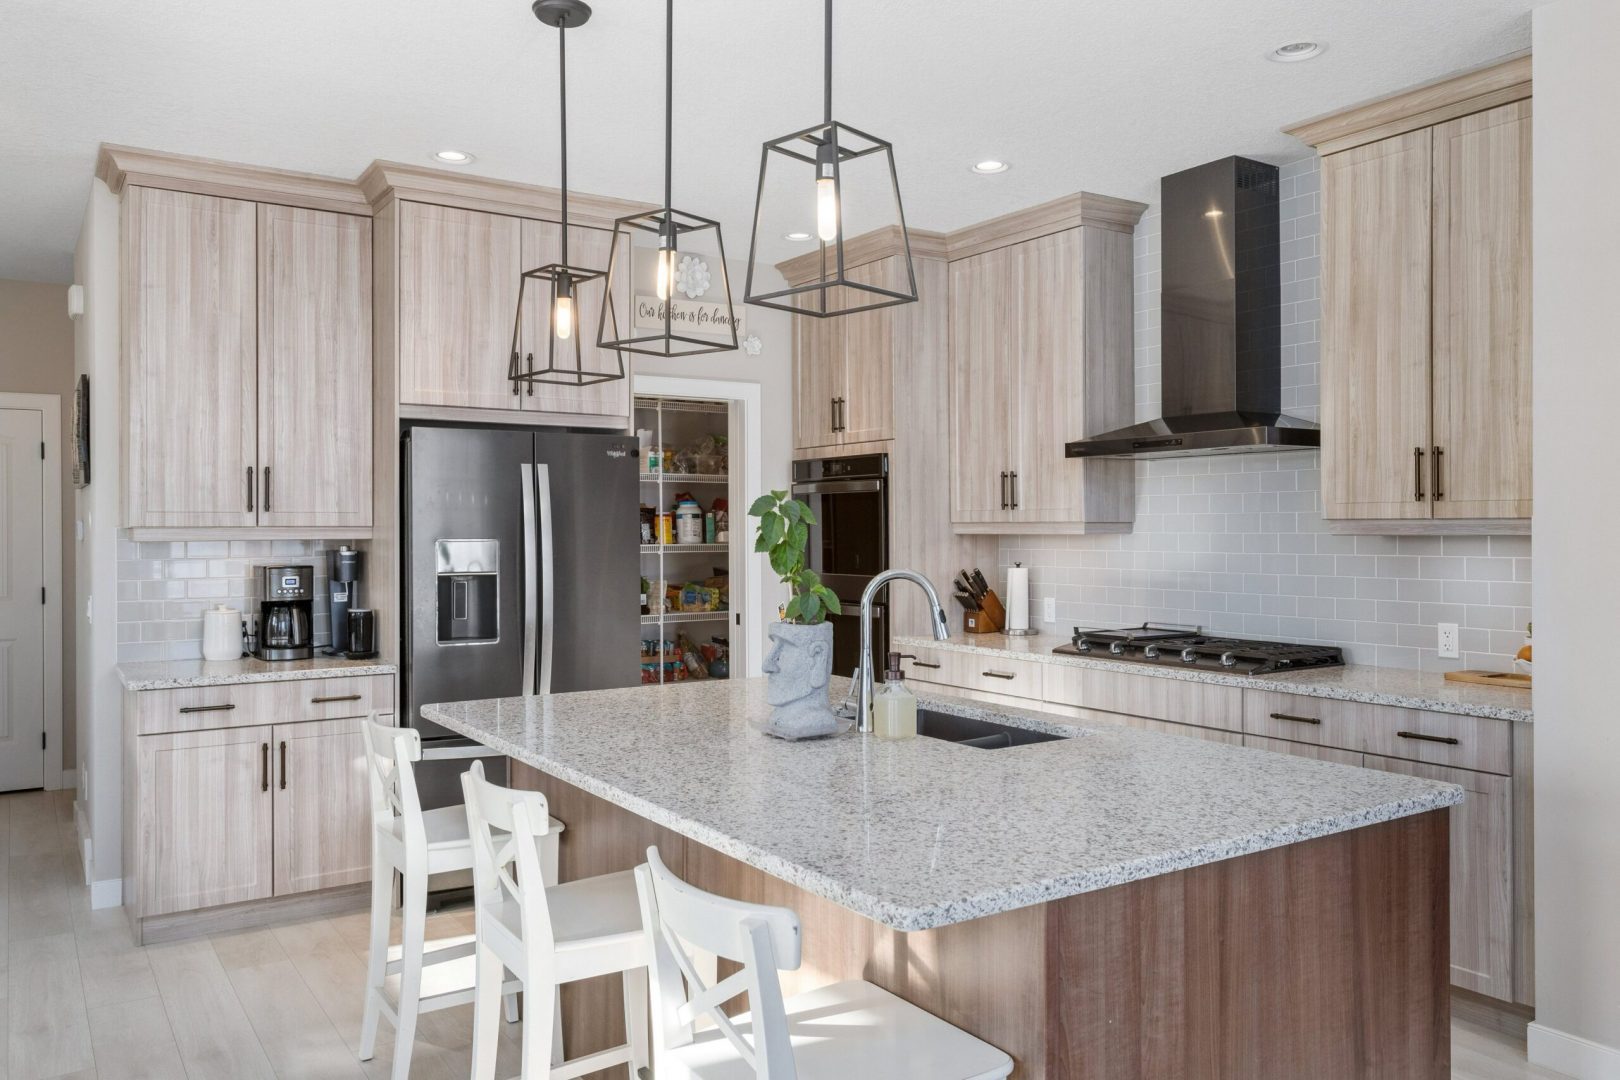 Real Estate Photography. A premium interior photo of a kitchen photographed by Ryan Haggel from Calgary Premium Real Estate Photography.